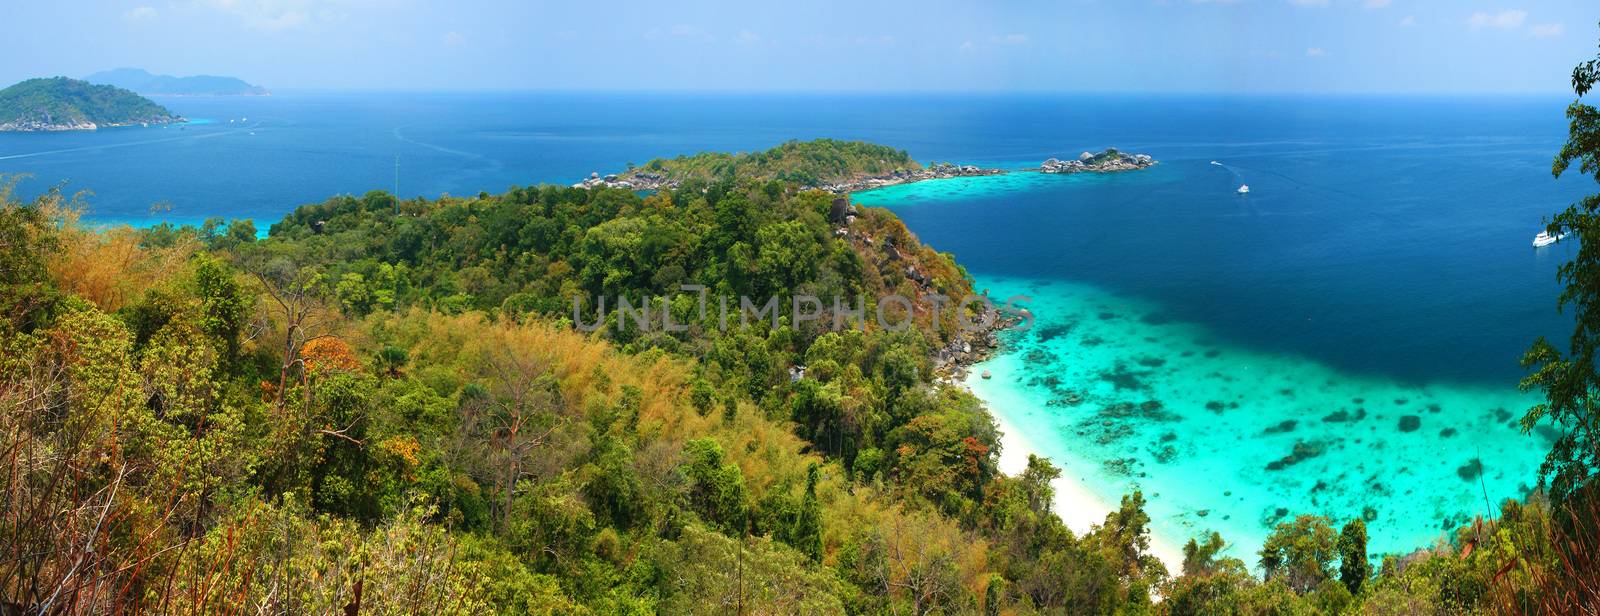 panoramic viewpoint of Similan Islands Paradise Bay, Thailand by think4photop